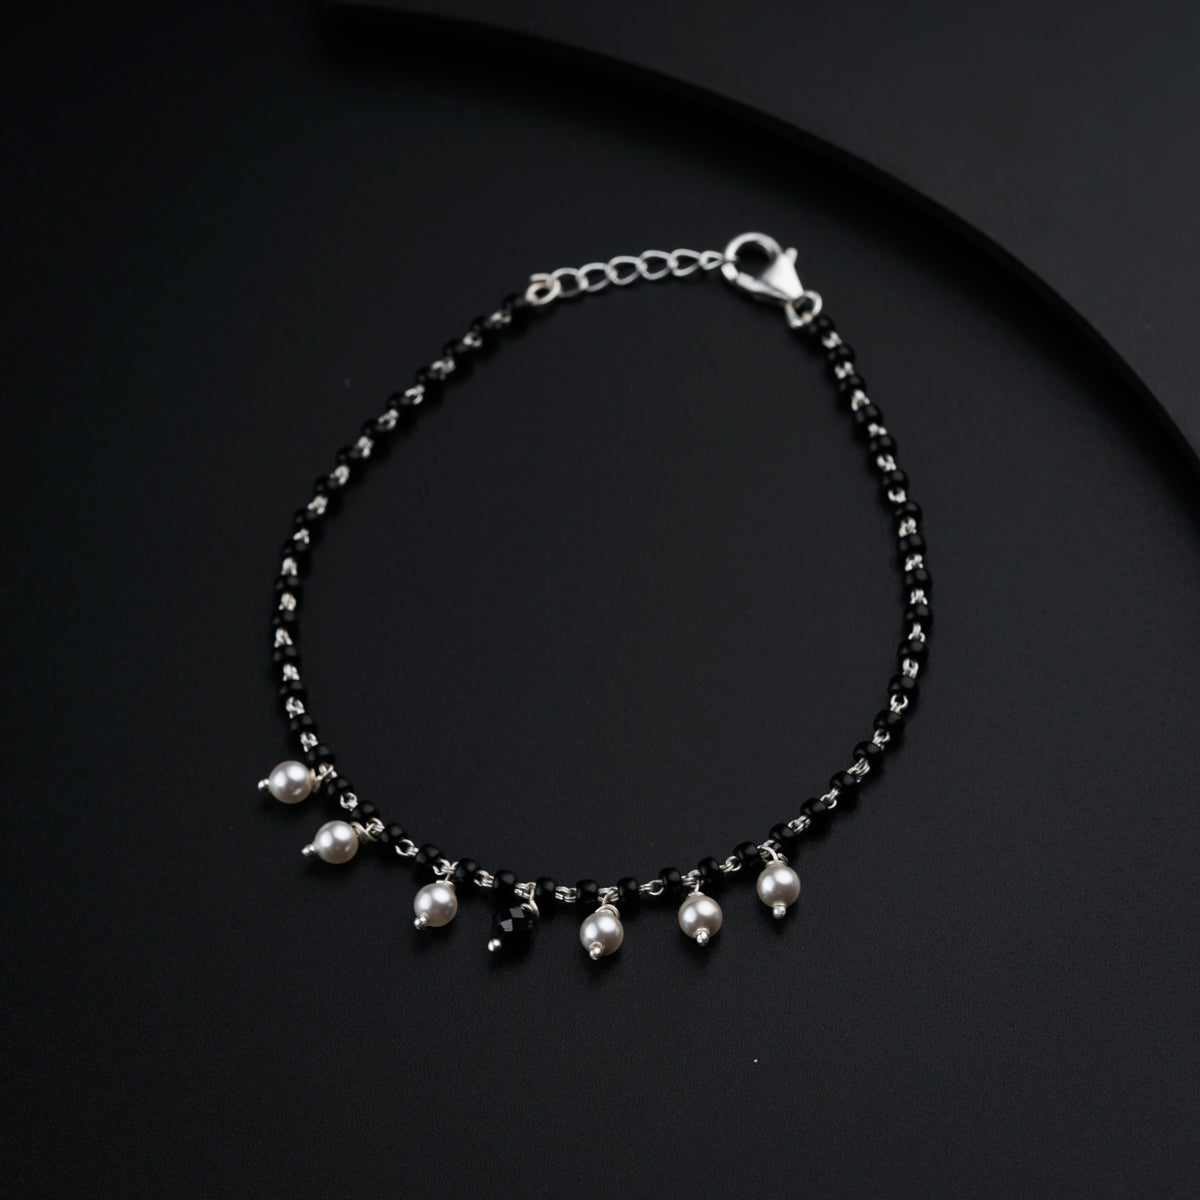 a black beaded bracelet with silver beads